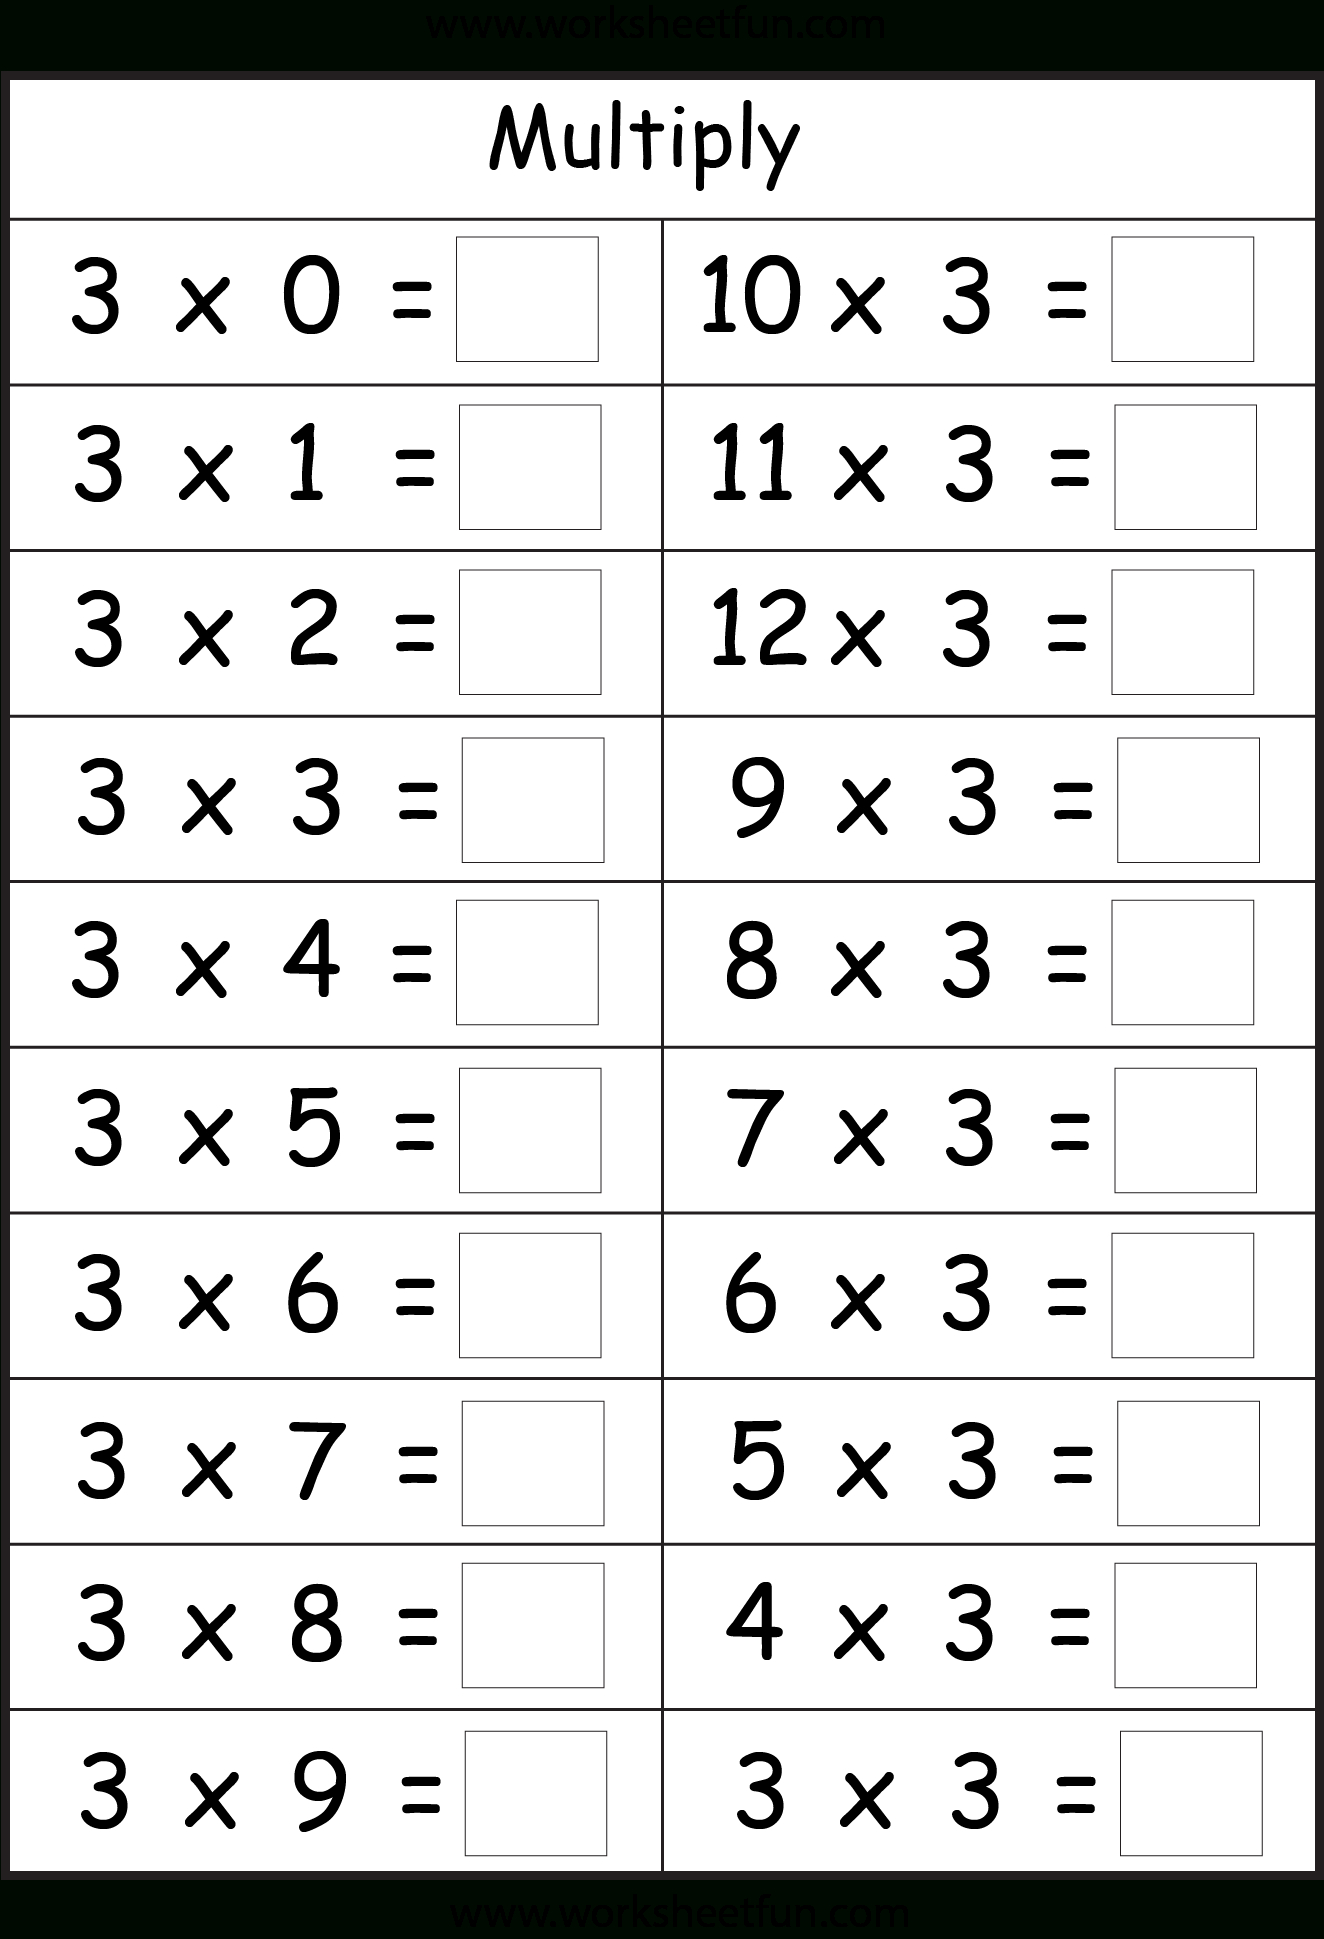  Multiplication Worksheets 3 s And 4 s Printable Multiplication Flash Cards